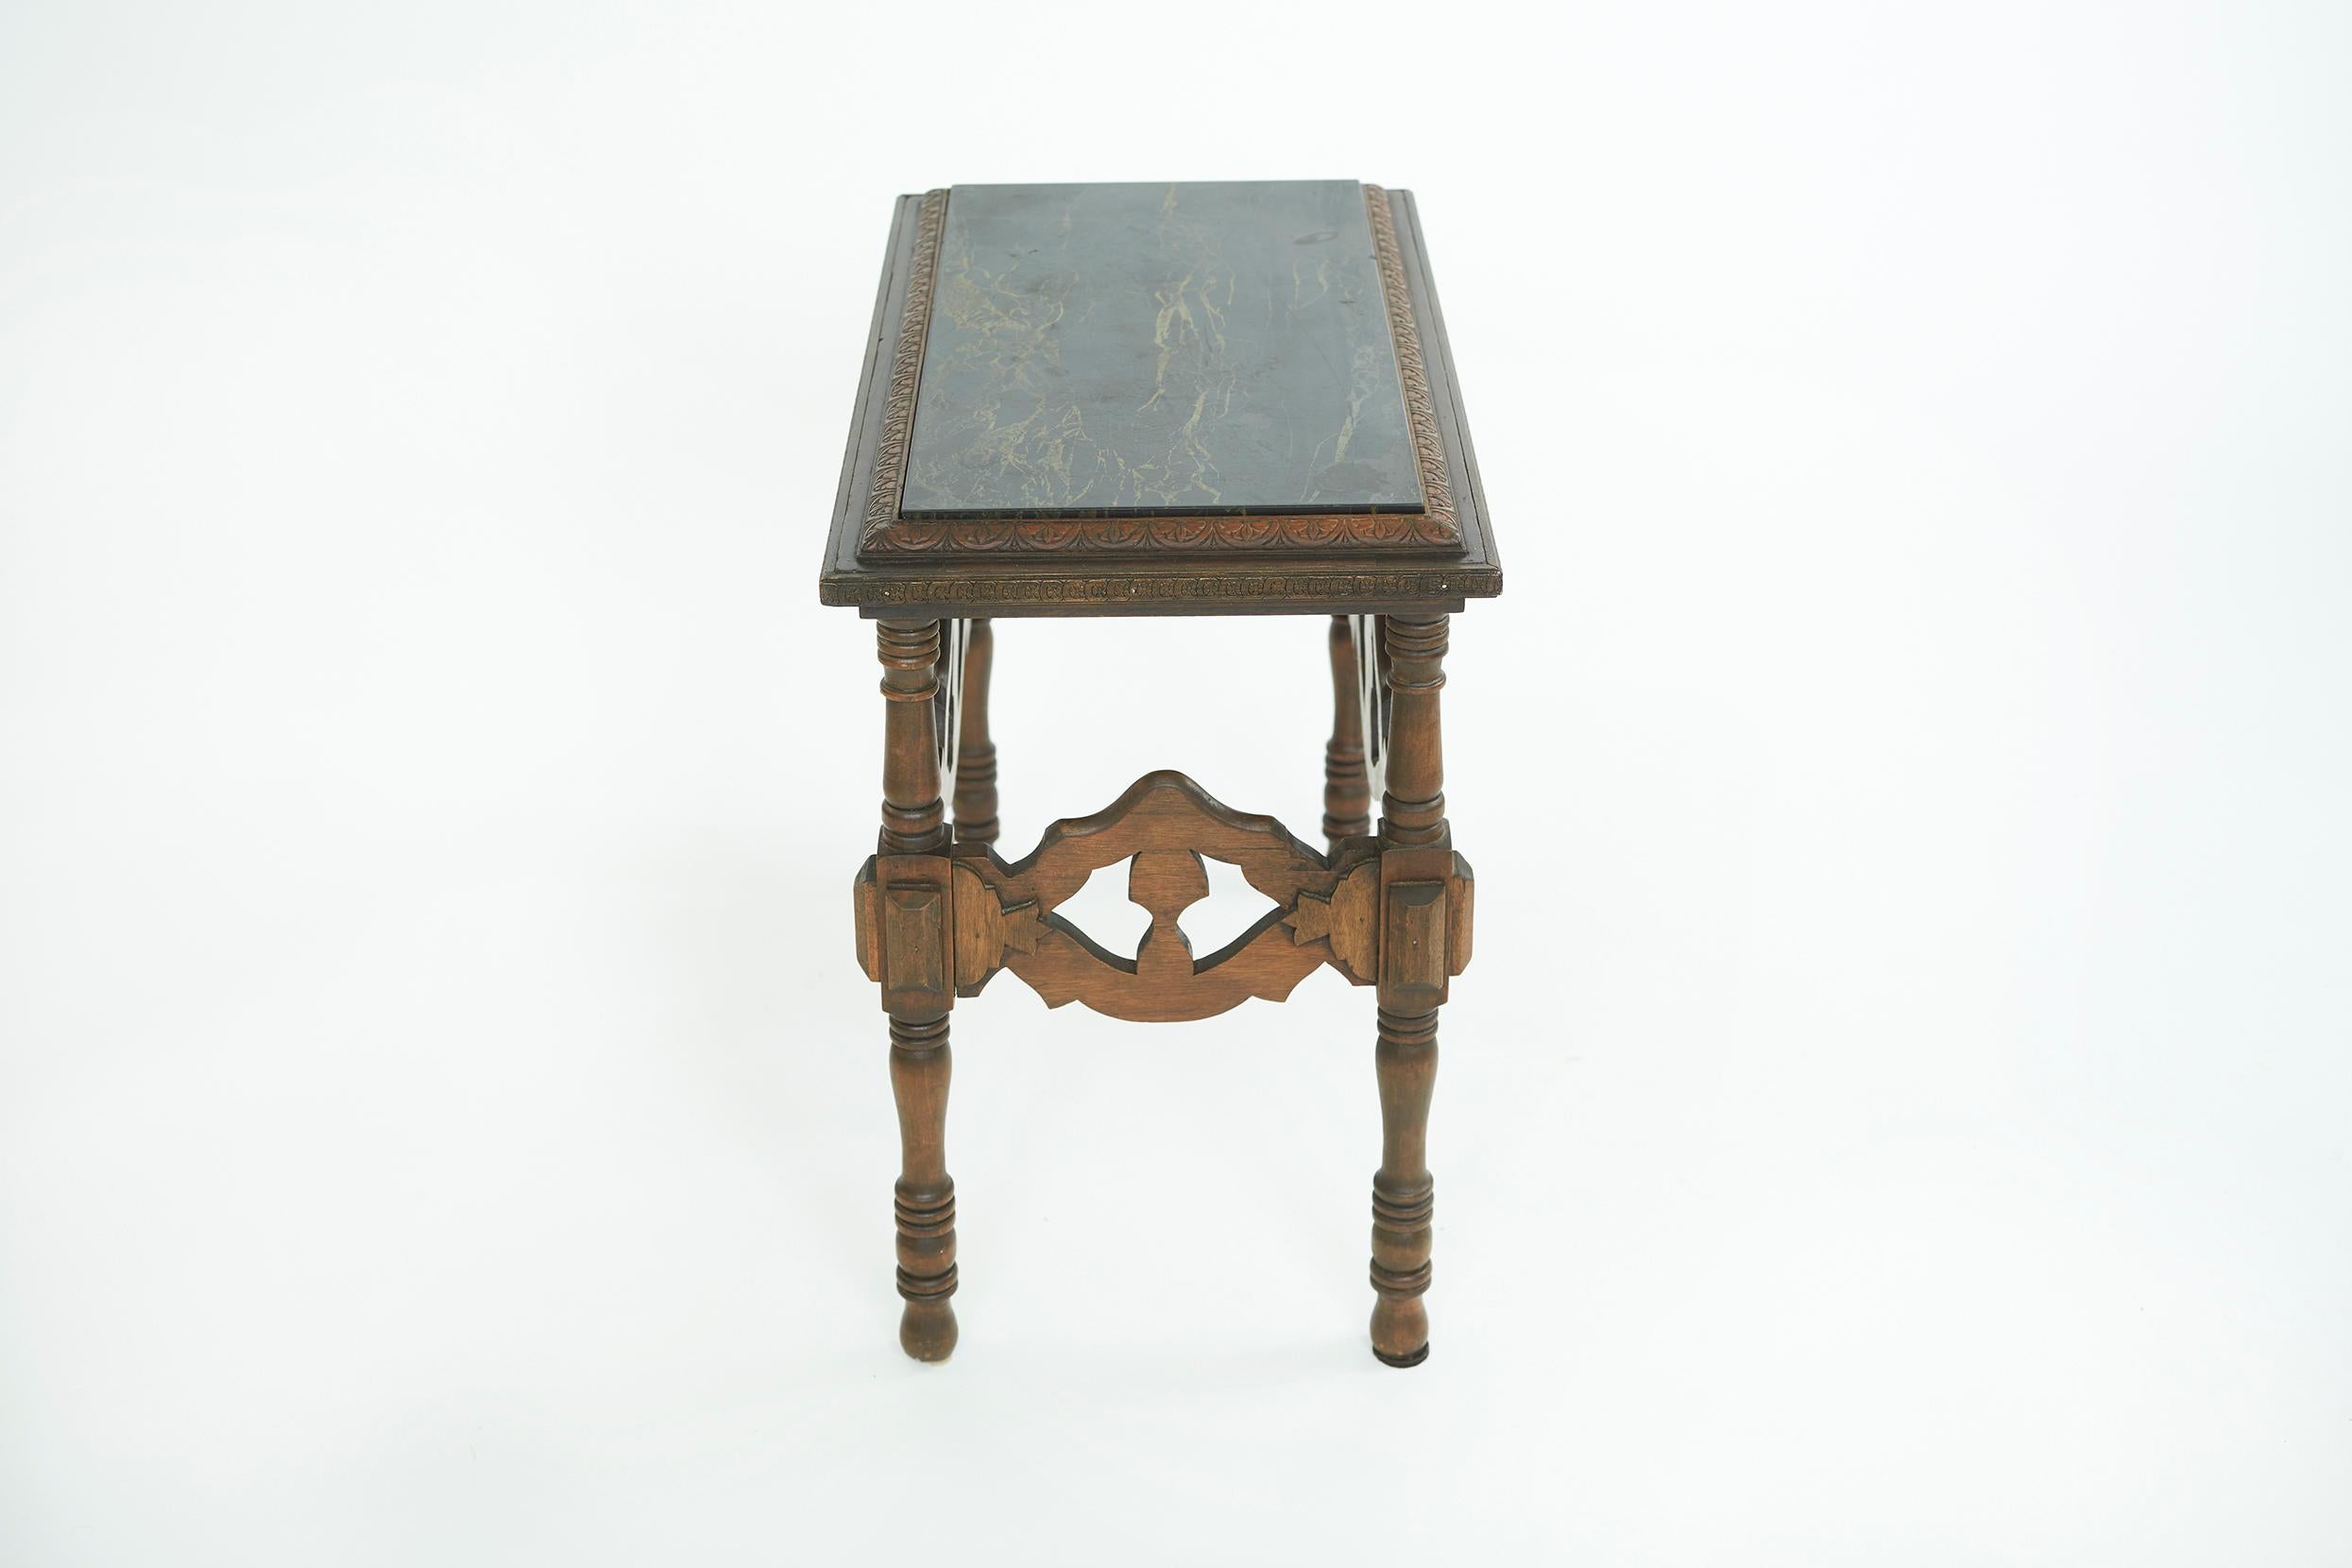 Beautiful English arts and crafts with marble inserted side table, on rounded legs with scroll feature & geometric rectangle trim features an intricate foliate design. The table is in good condition. Minor wear consistent with age / use. The table